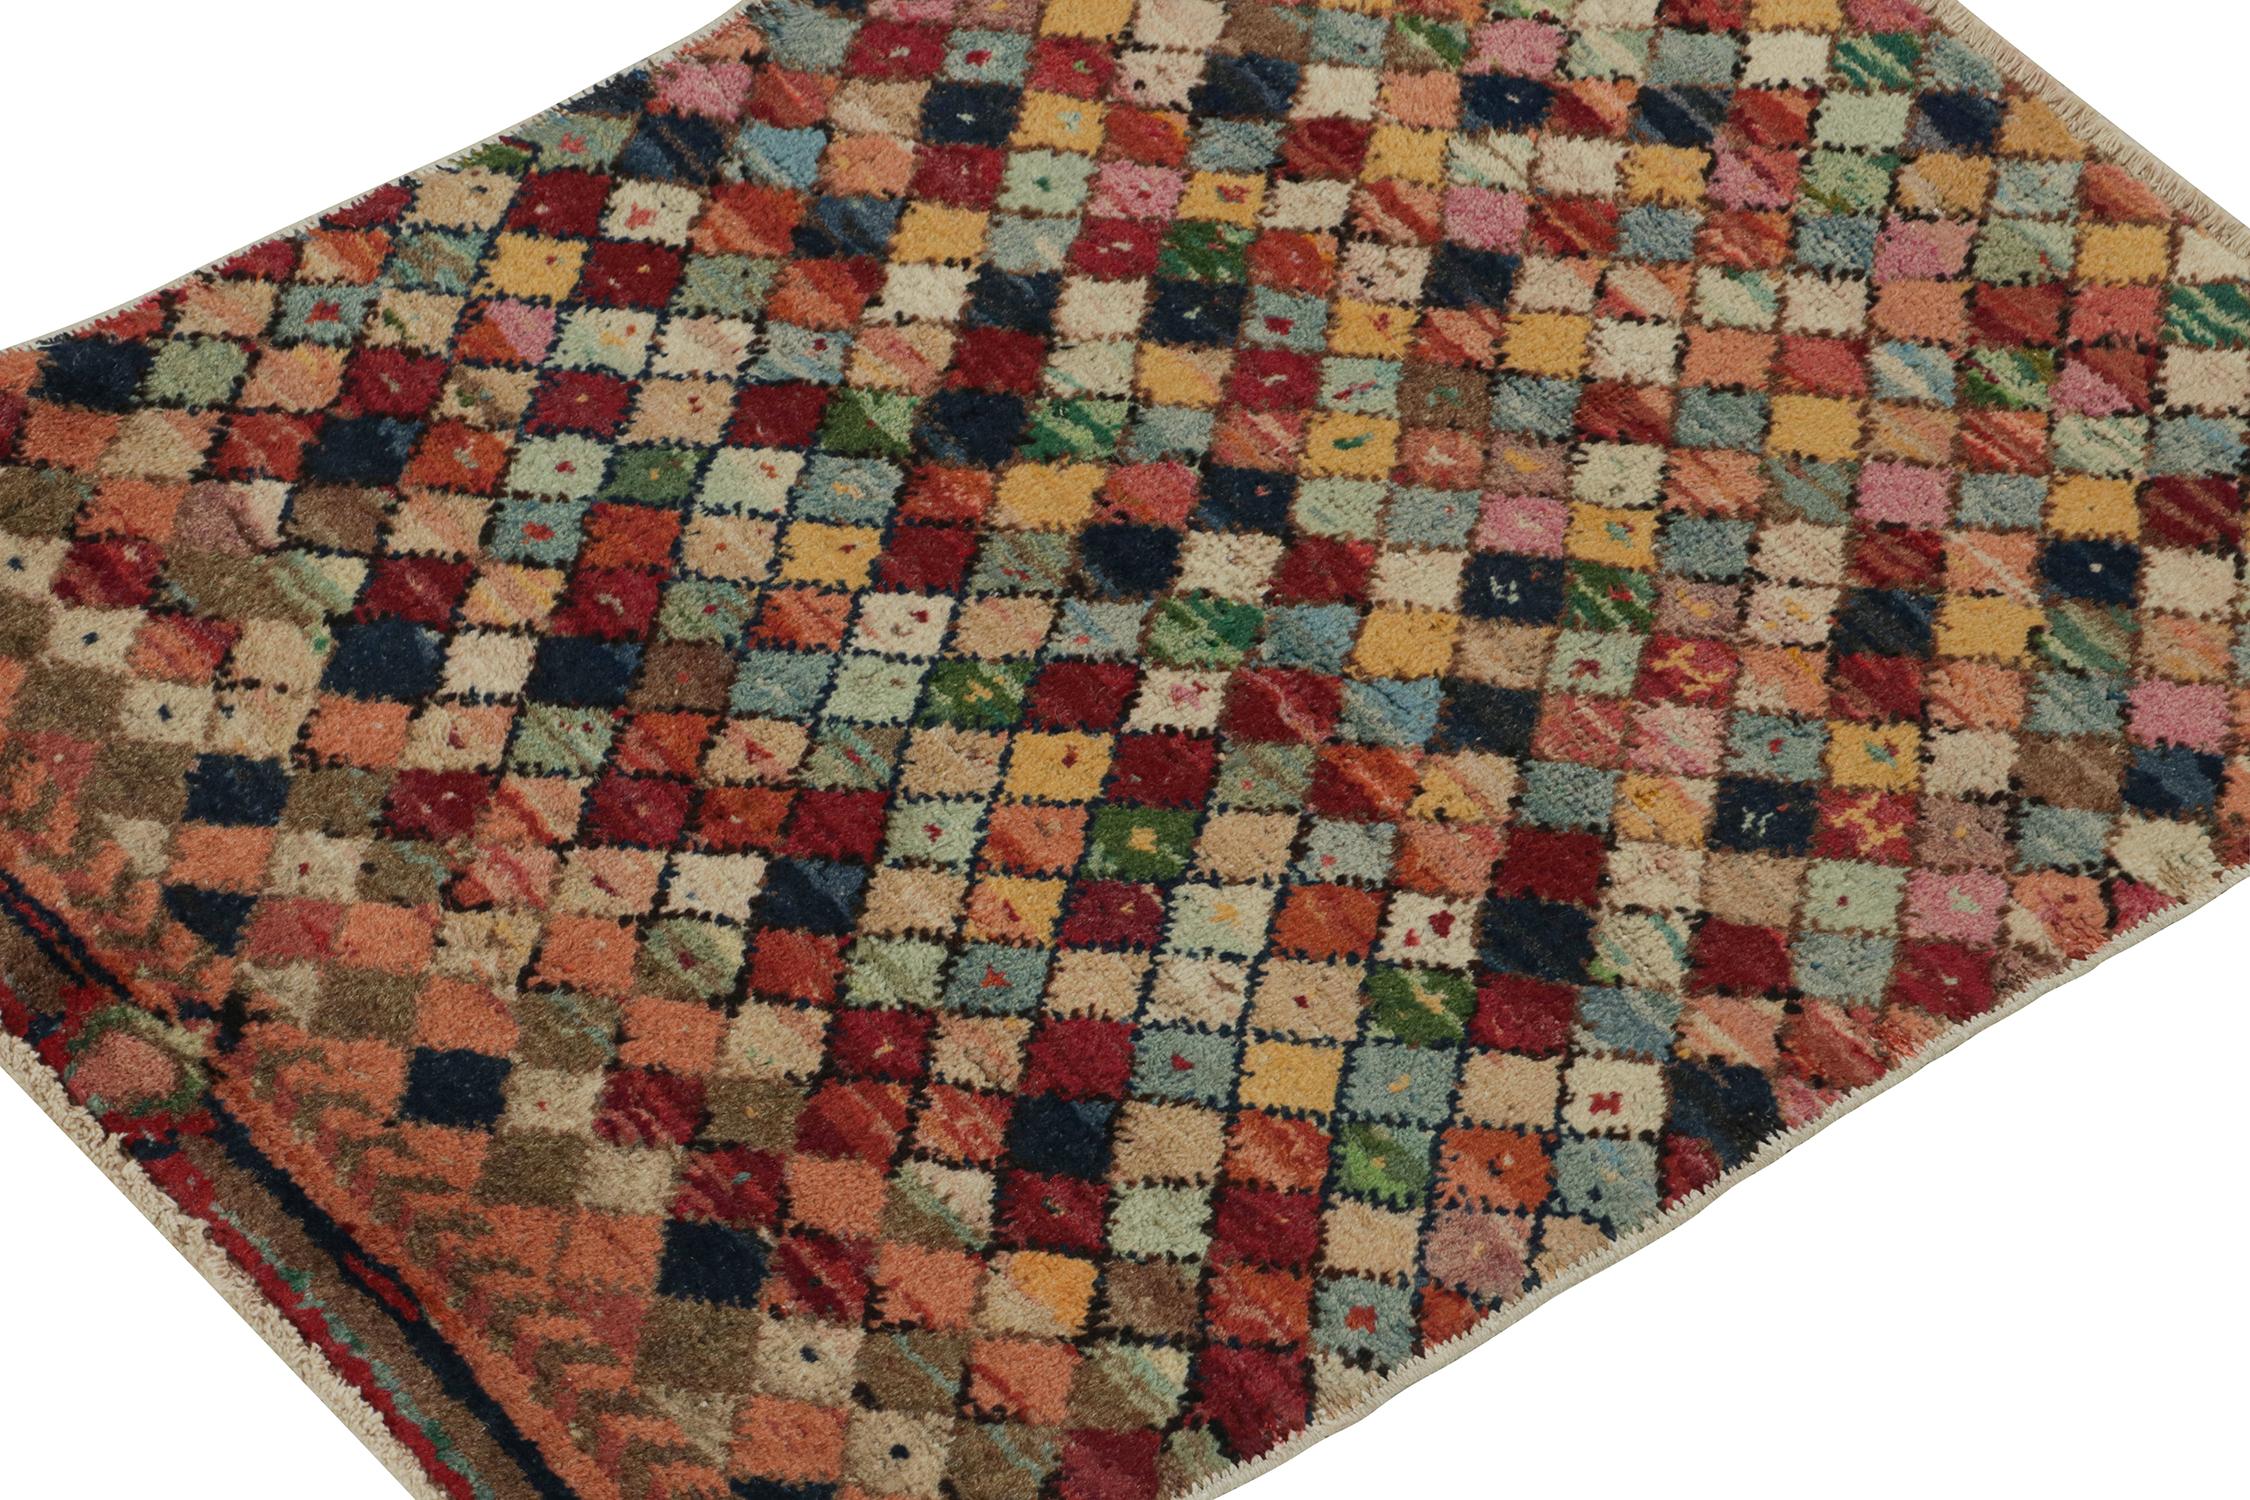 A vintage 2x3 rug from the Mid-Century Pasha Collection by Rug & Kilim—curating works of multi-disciplinary Turkish artist, Zeki Müren. 

On the Design: The piece embodies, if not exemplifies, the innovative style of Müren’s “industrial Art Deco”